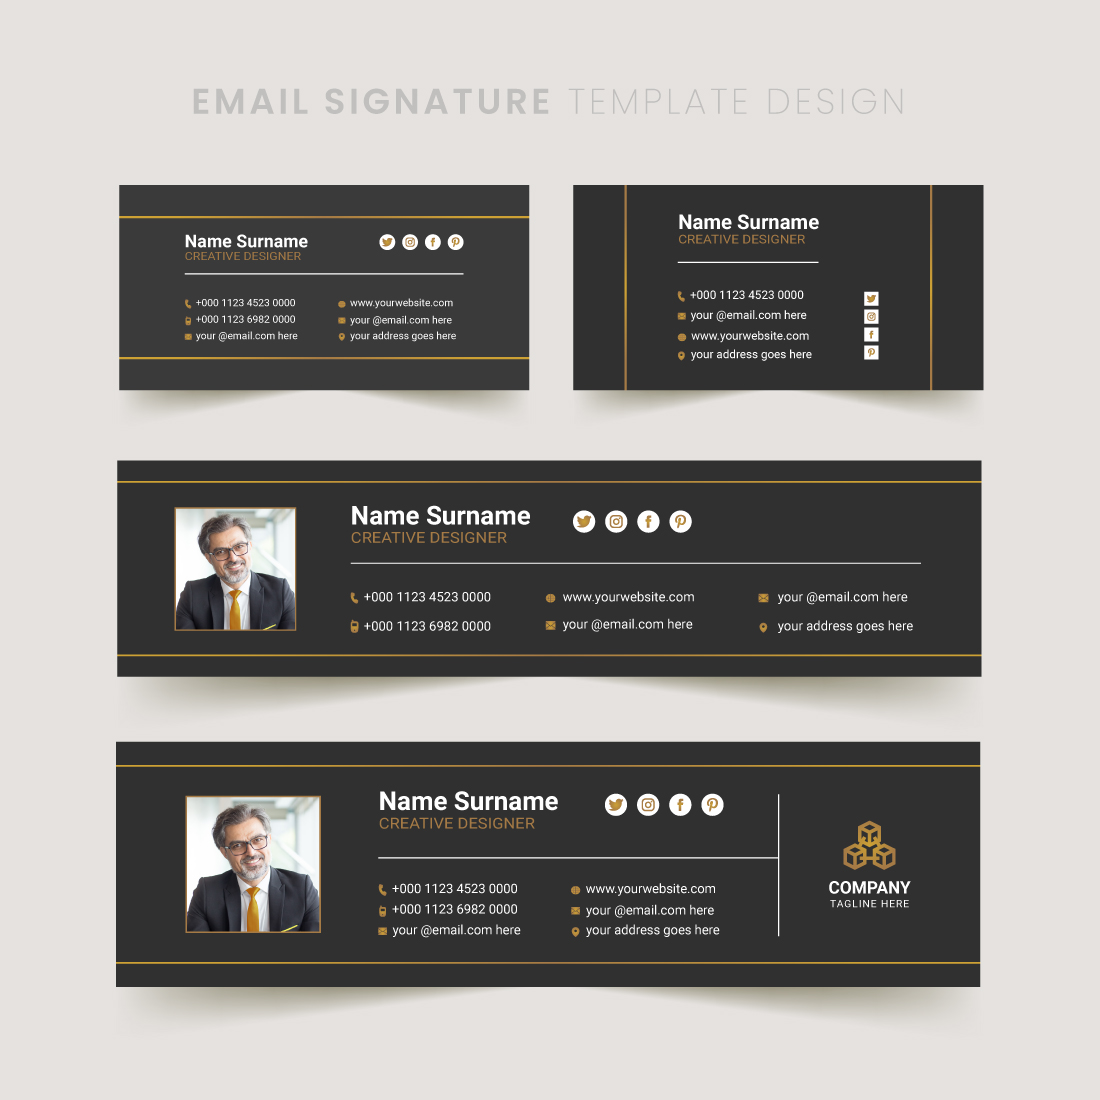 Corporate Business Email Signature Template set cover image.